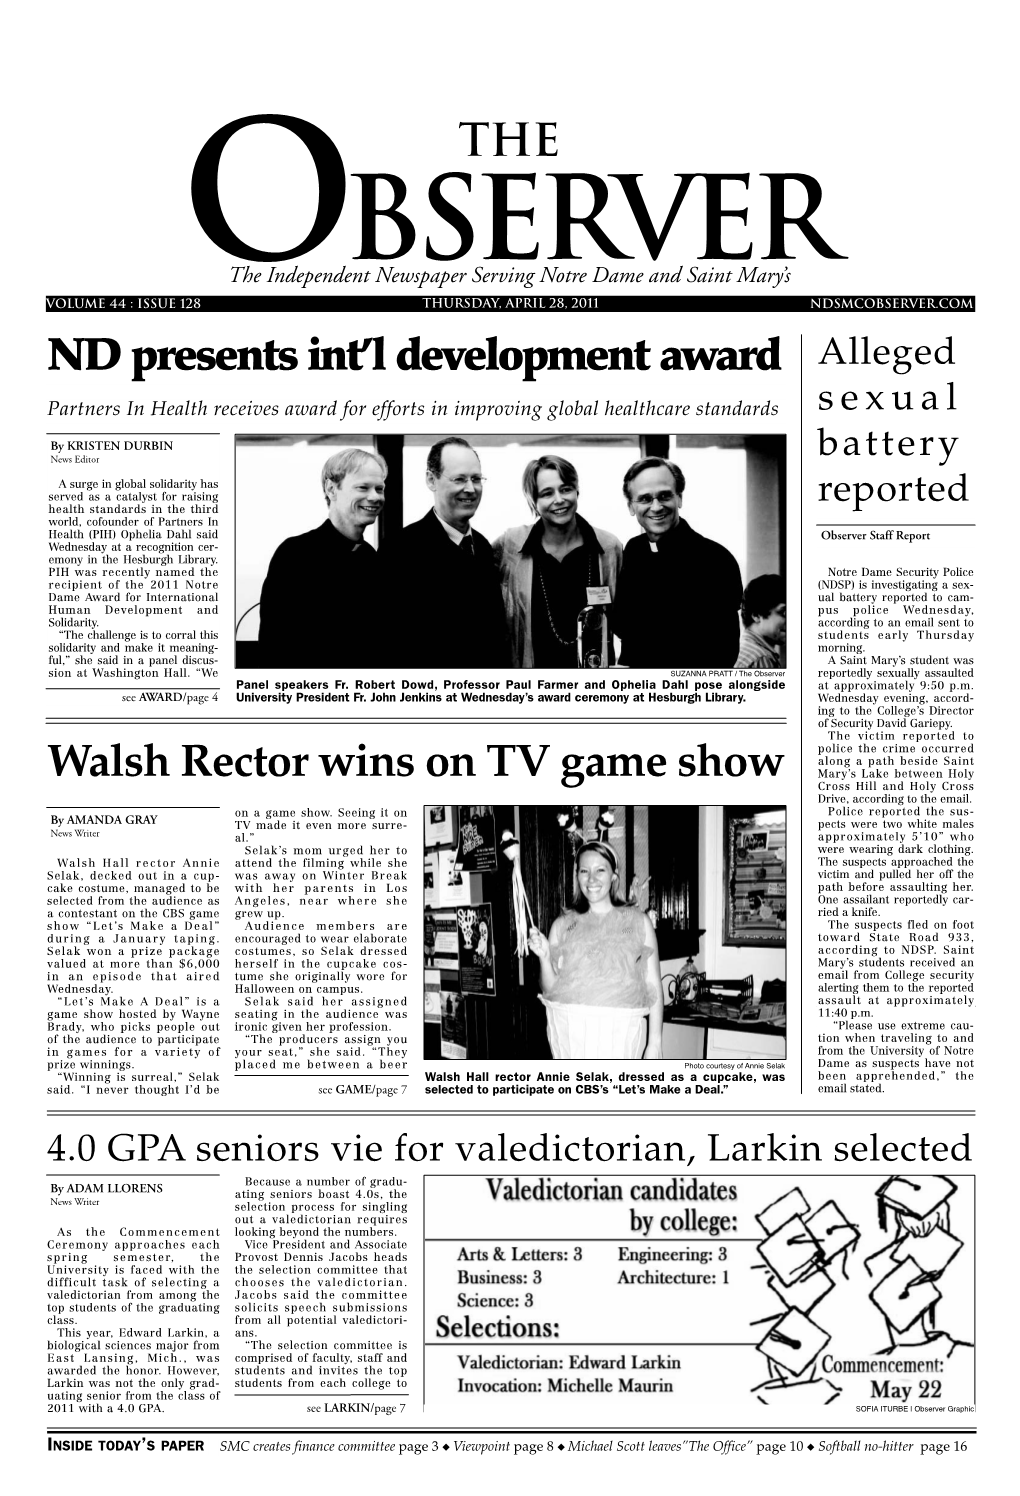 ND Presents Int'l Development Award Walsh Rector Wins on TV Game Show